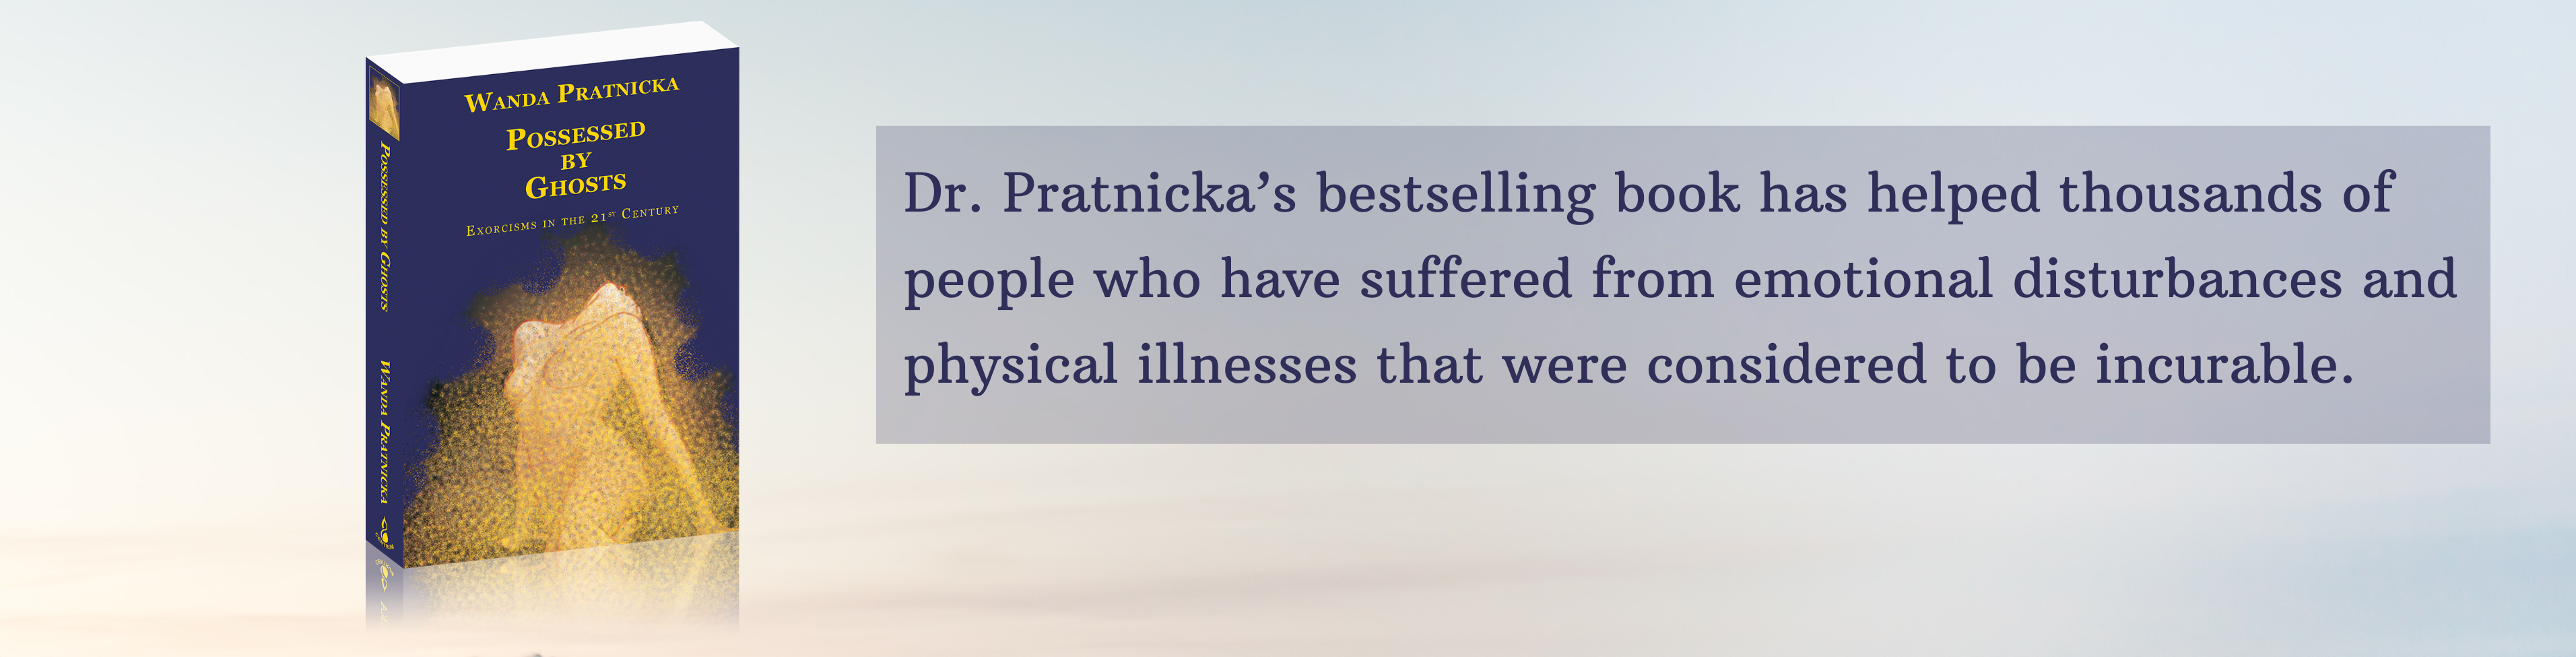 Dr. Pratnickas bestselling book has helped thousands of people who have suffered from emotional disturbances and physical illnesses that were considered to be incurable. 7